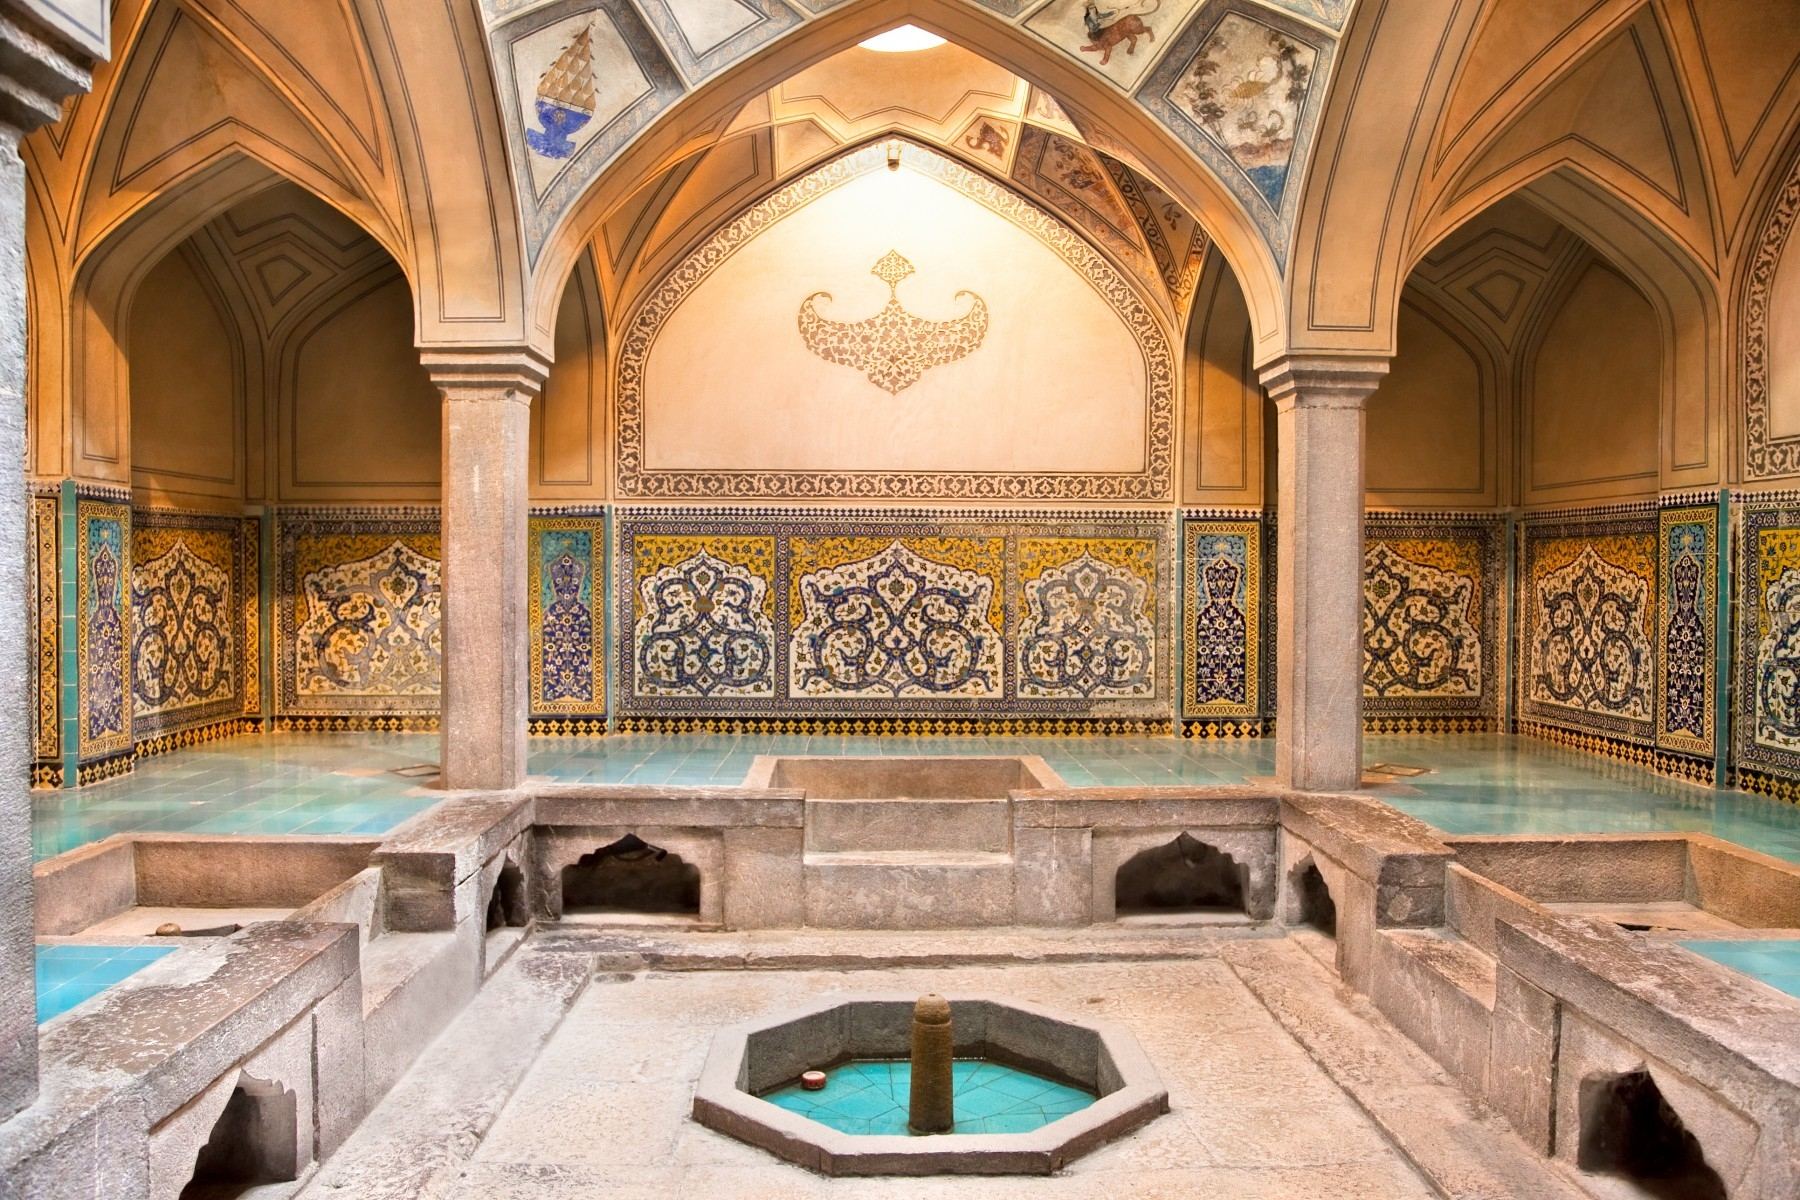 The Bath House of the Winds, the only surviving Athenian public bath